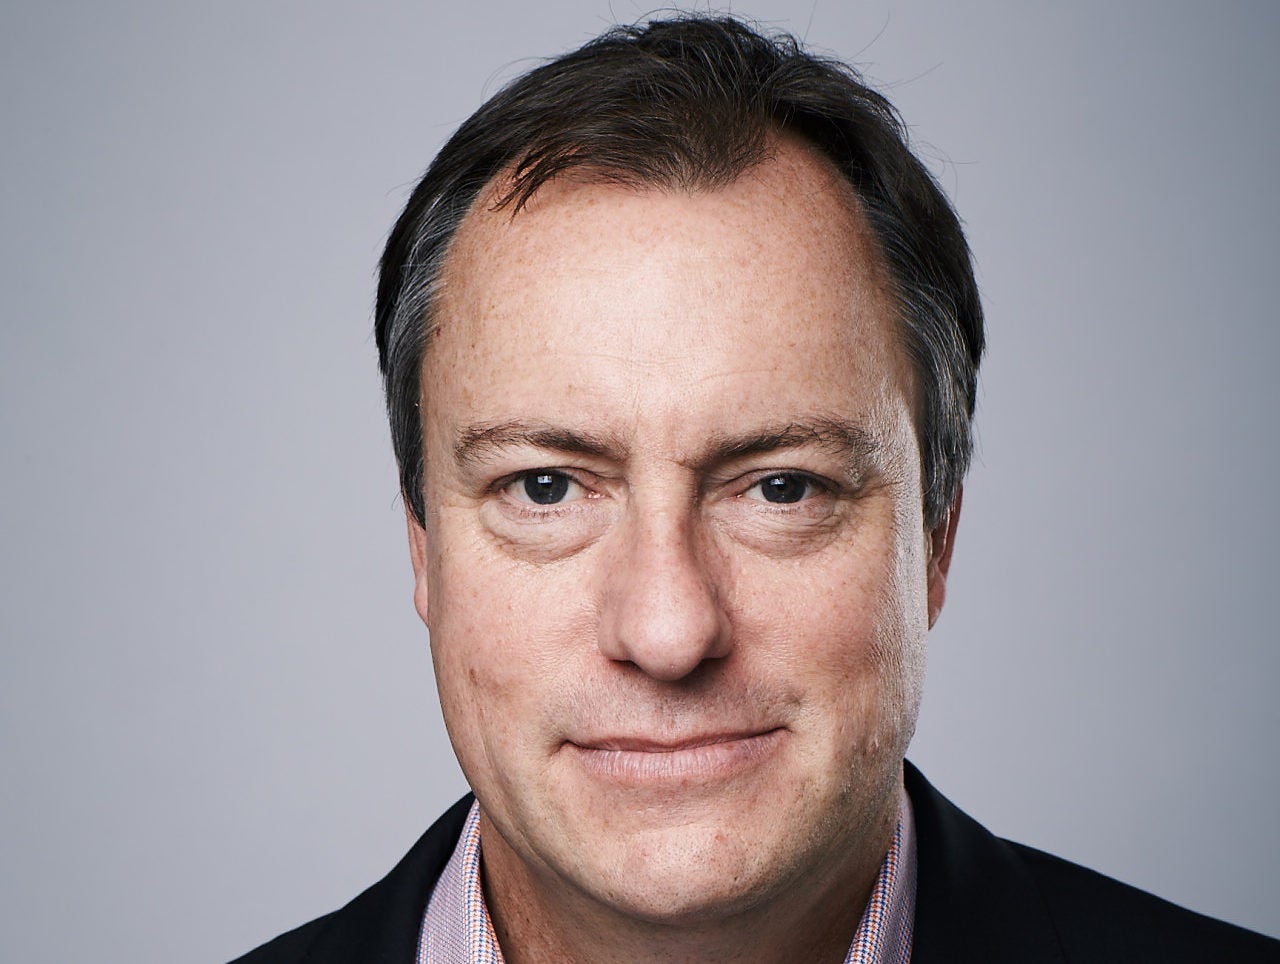 Hearst Magazines appoints Trinity Mirror's James Wildman as president and chief executive